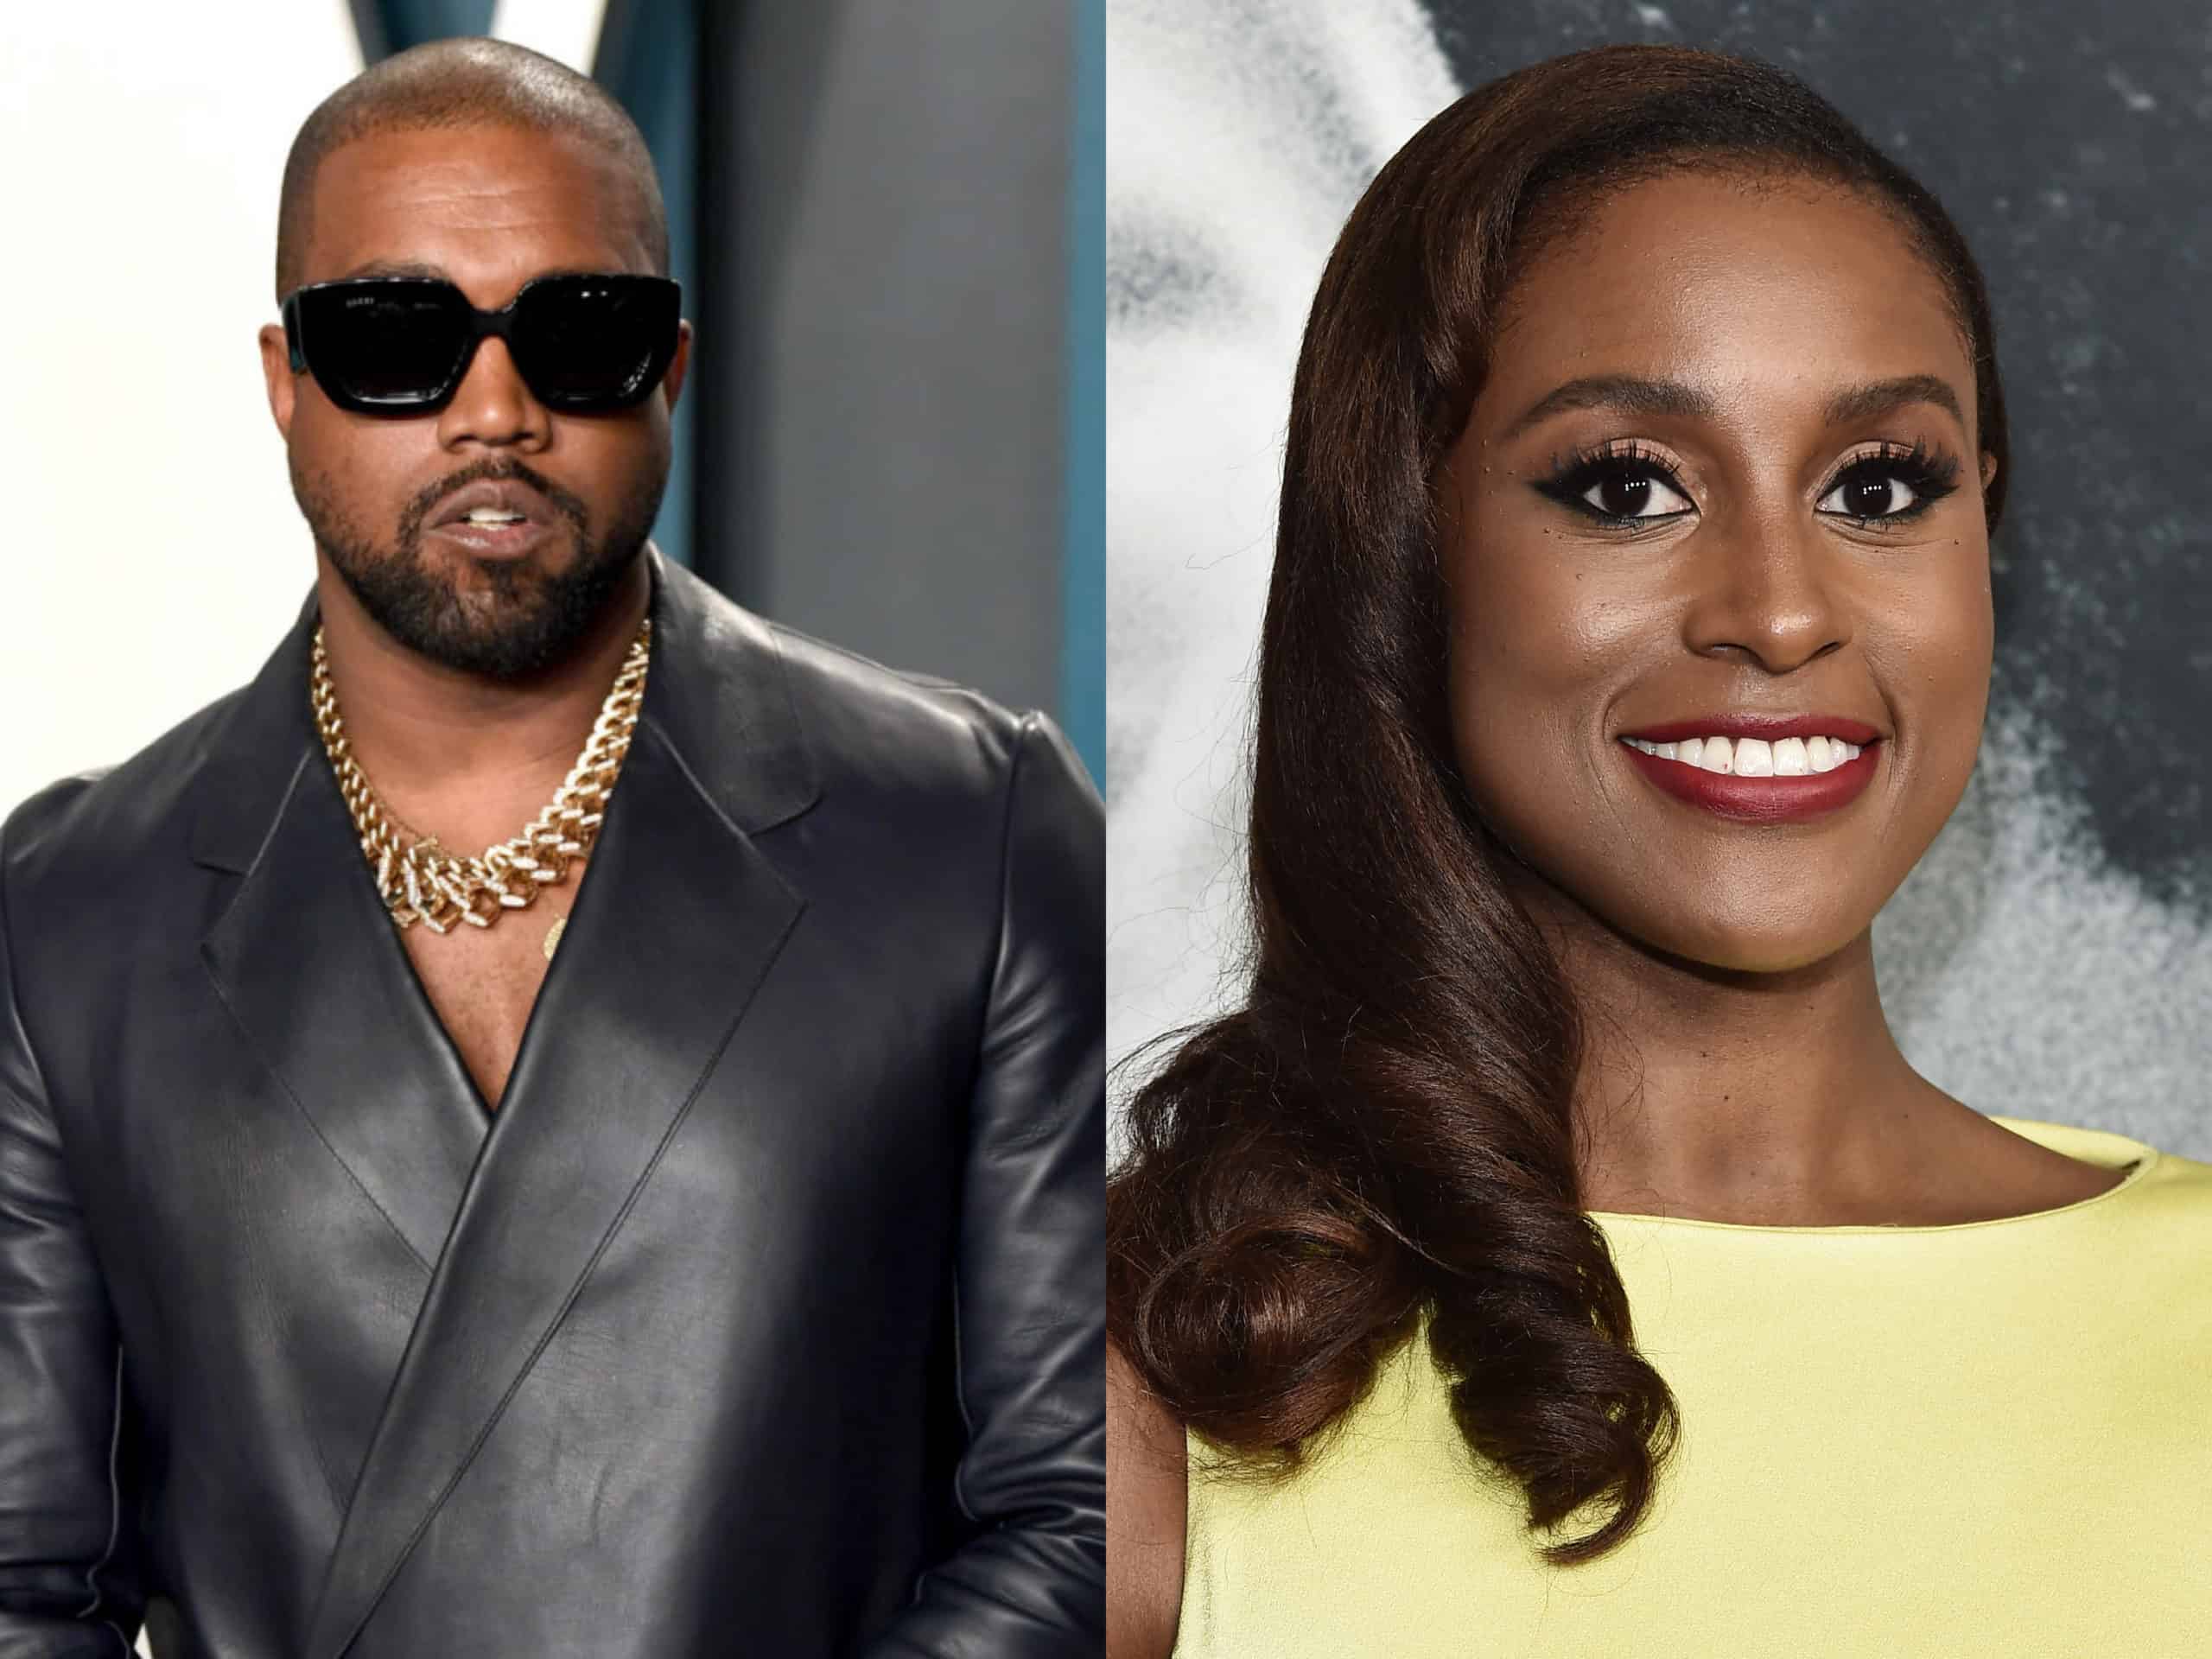 Kanye West Speaks Out After His Name Is Mentioned On 'SNL' During A Sketch With Issa Rae